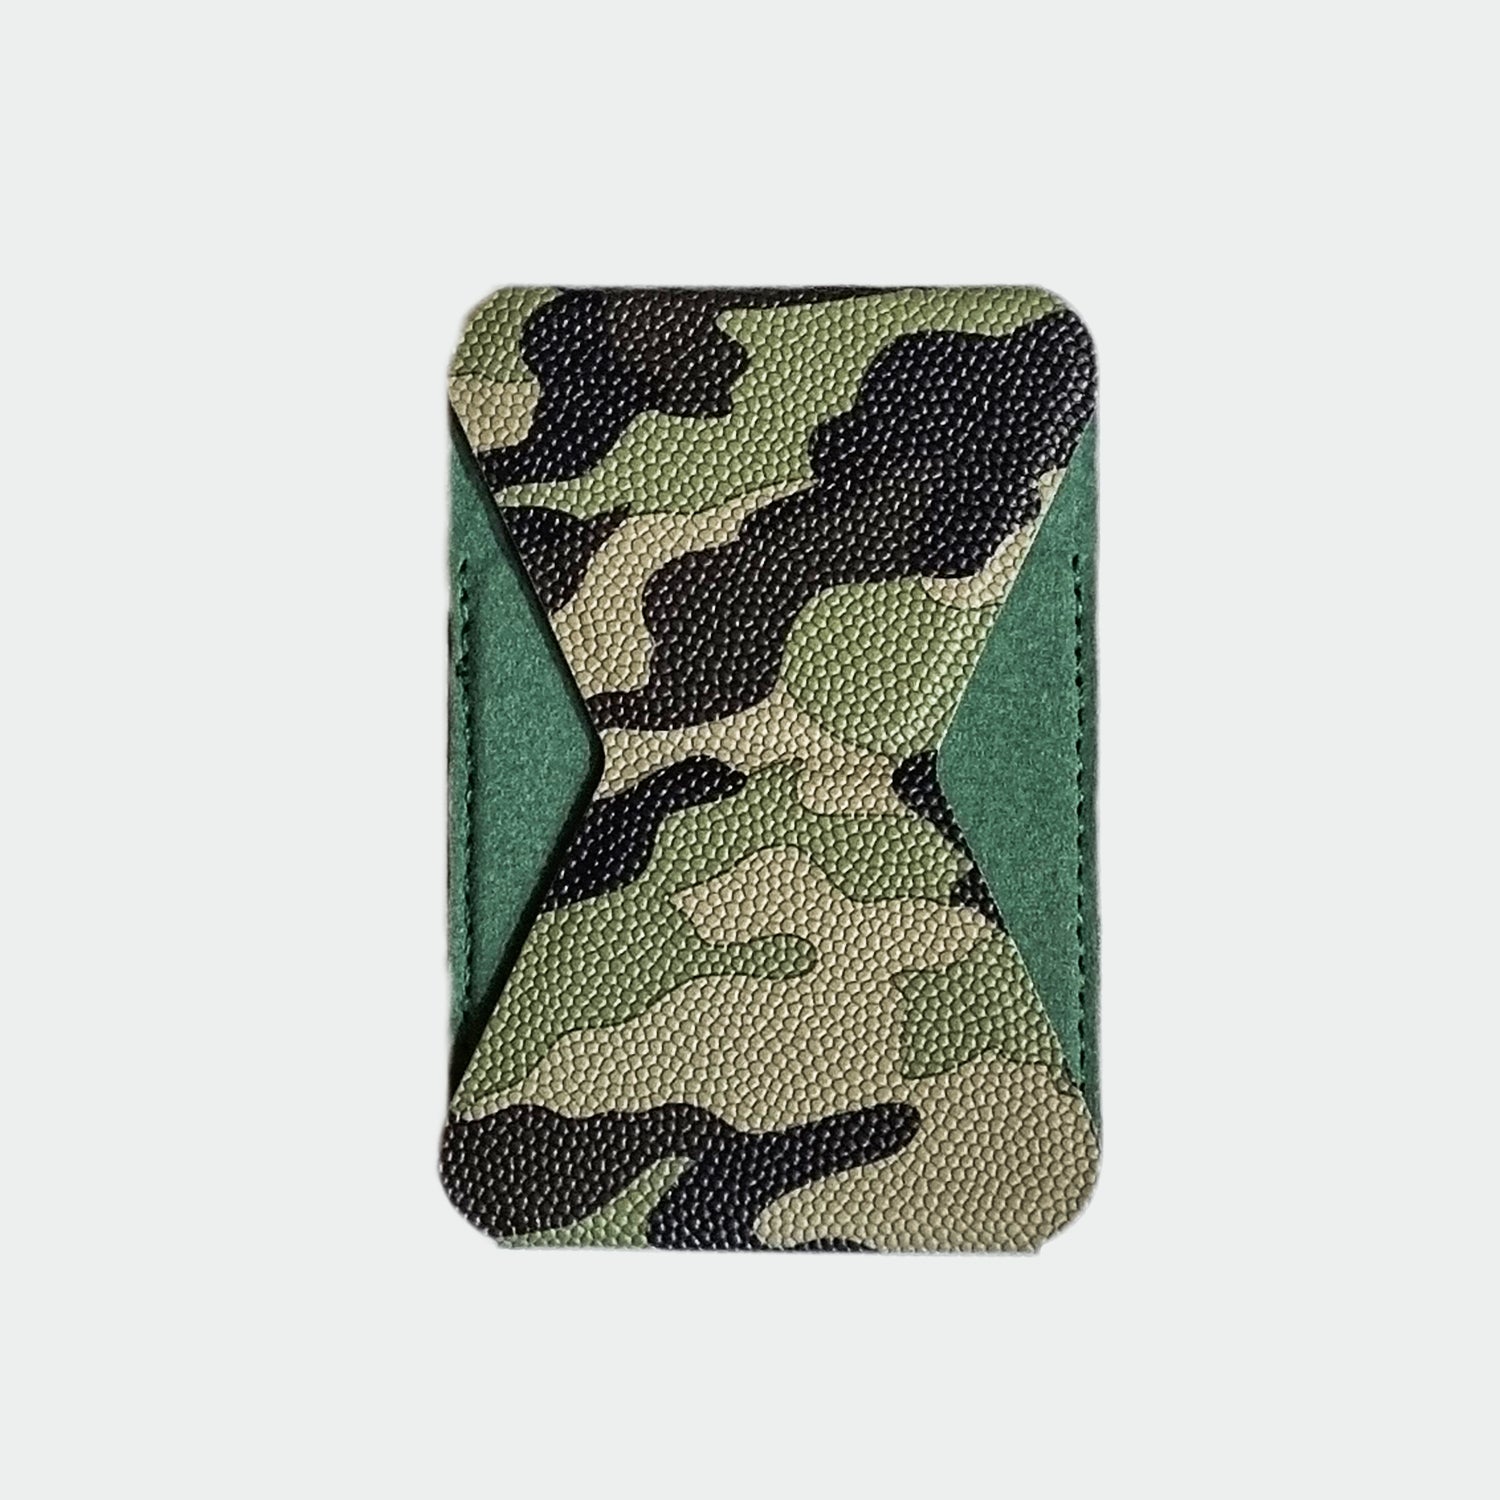 Buy Camouflage phone stand and wallet in Jordan - Phonatech